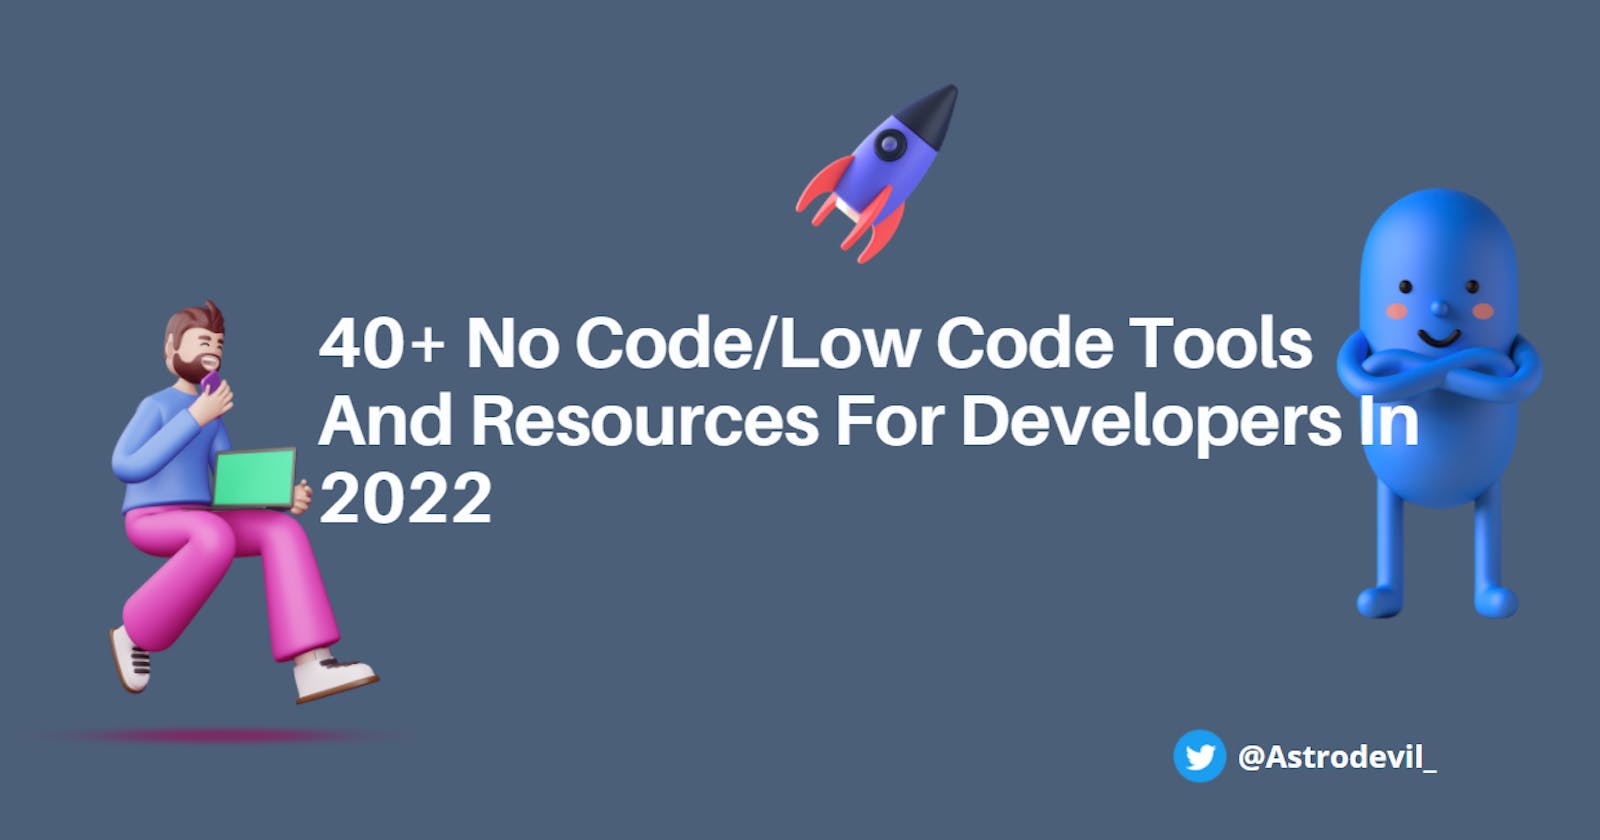 40+ No Code/Low Code Tools And Resources For Developers In 2022